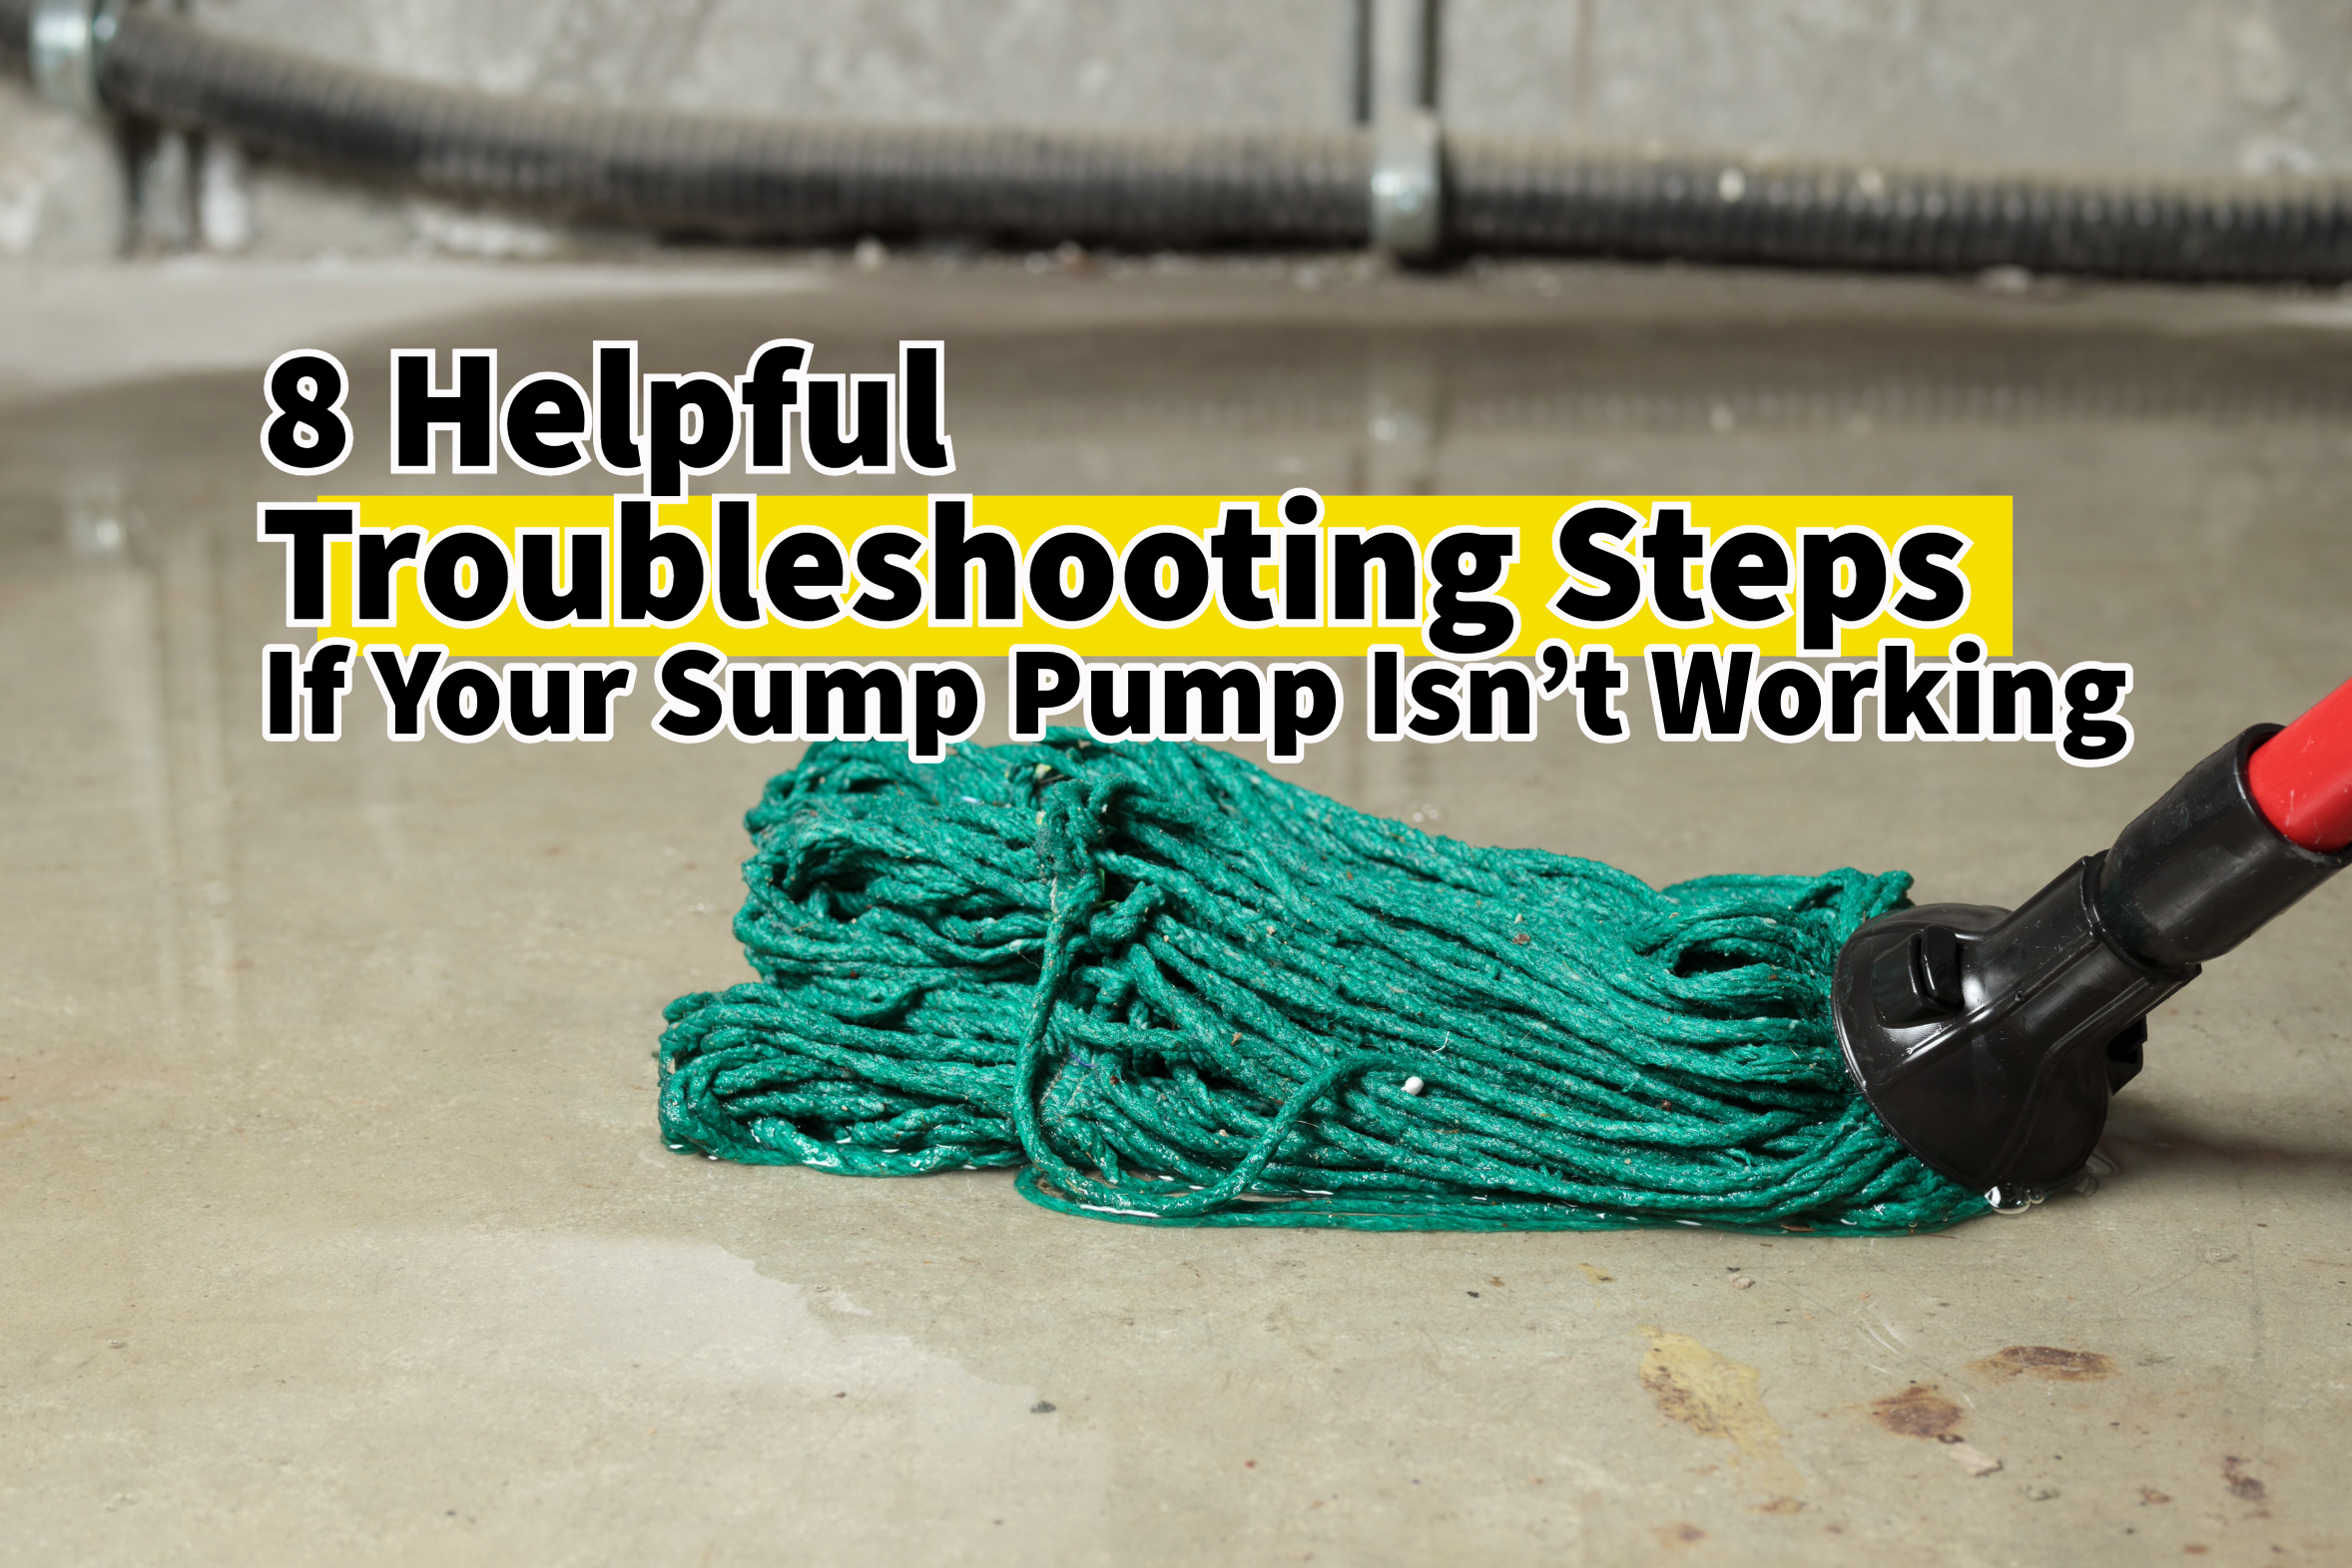 A homeowner’s guide to troubleshooting a malfunctioning sump pump. Plumbing and drain services in Canal Winchester, Ohio.